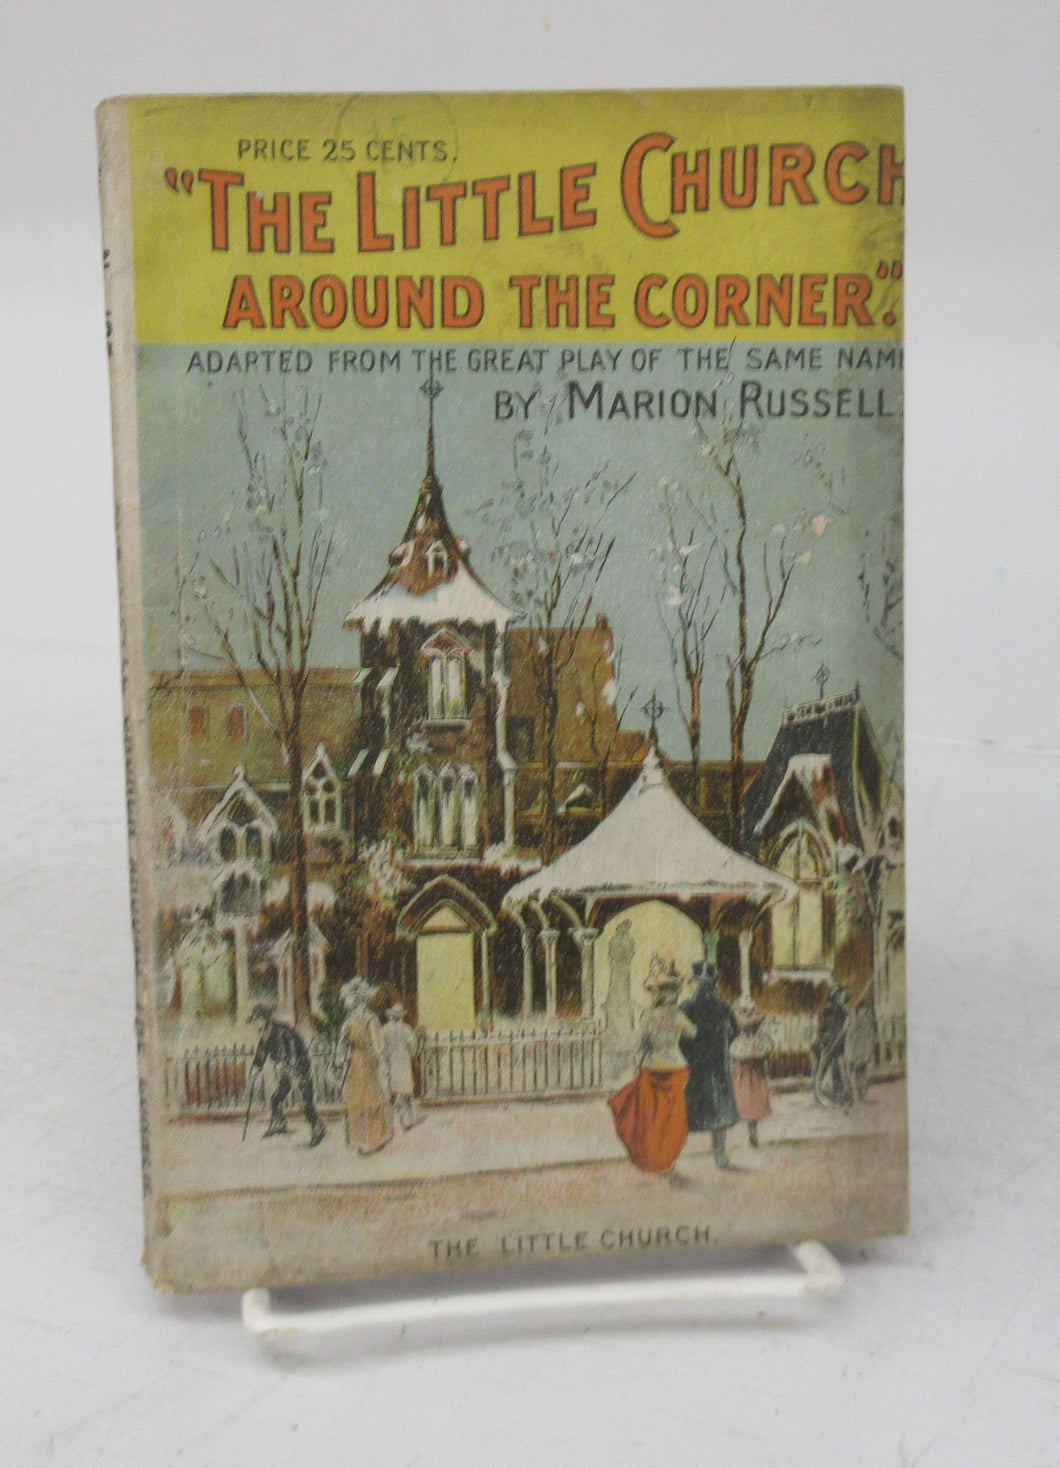 The Little Church Around the Corner. Adapted from the Great Play of the Same Name